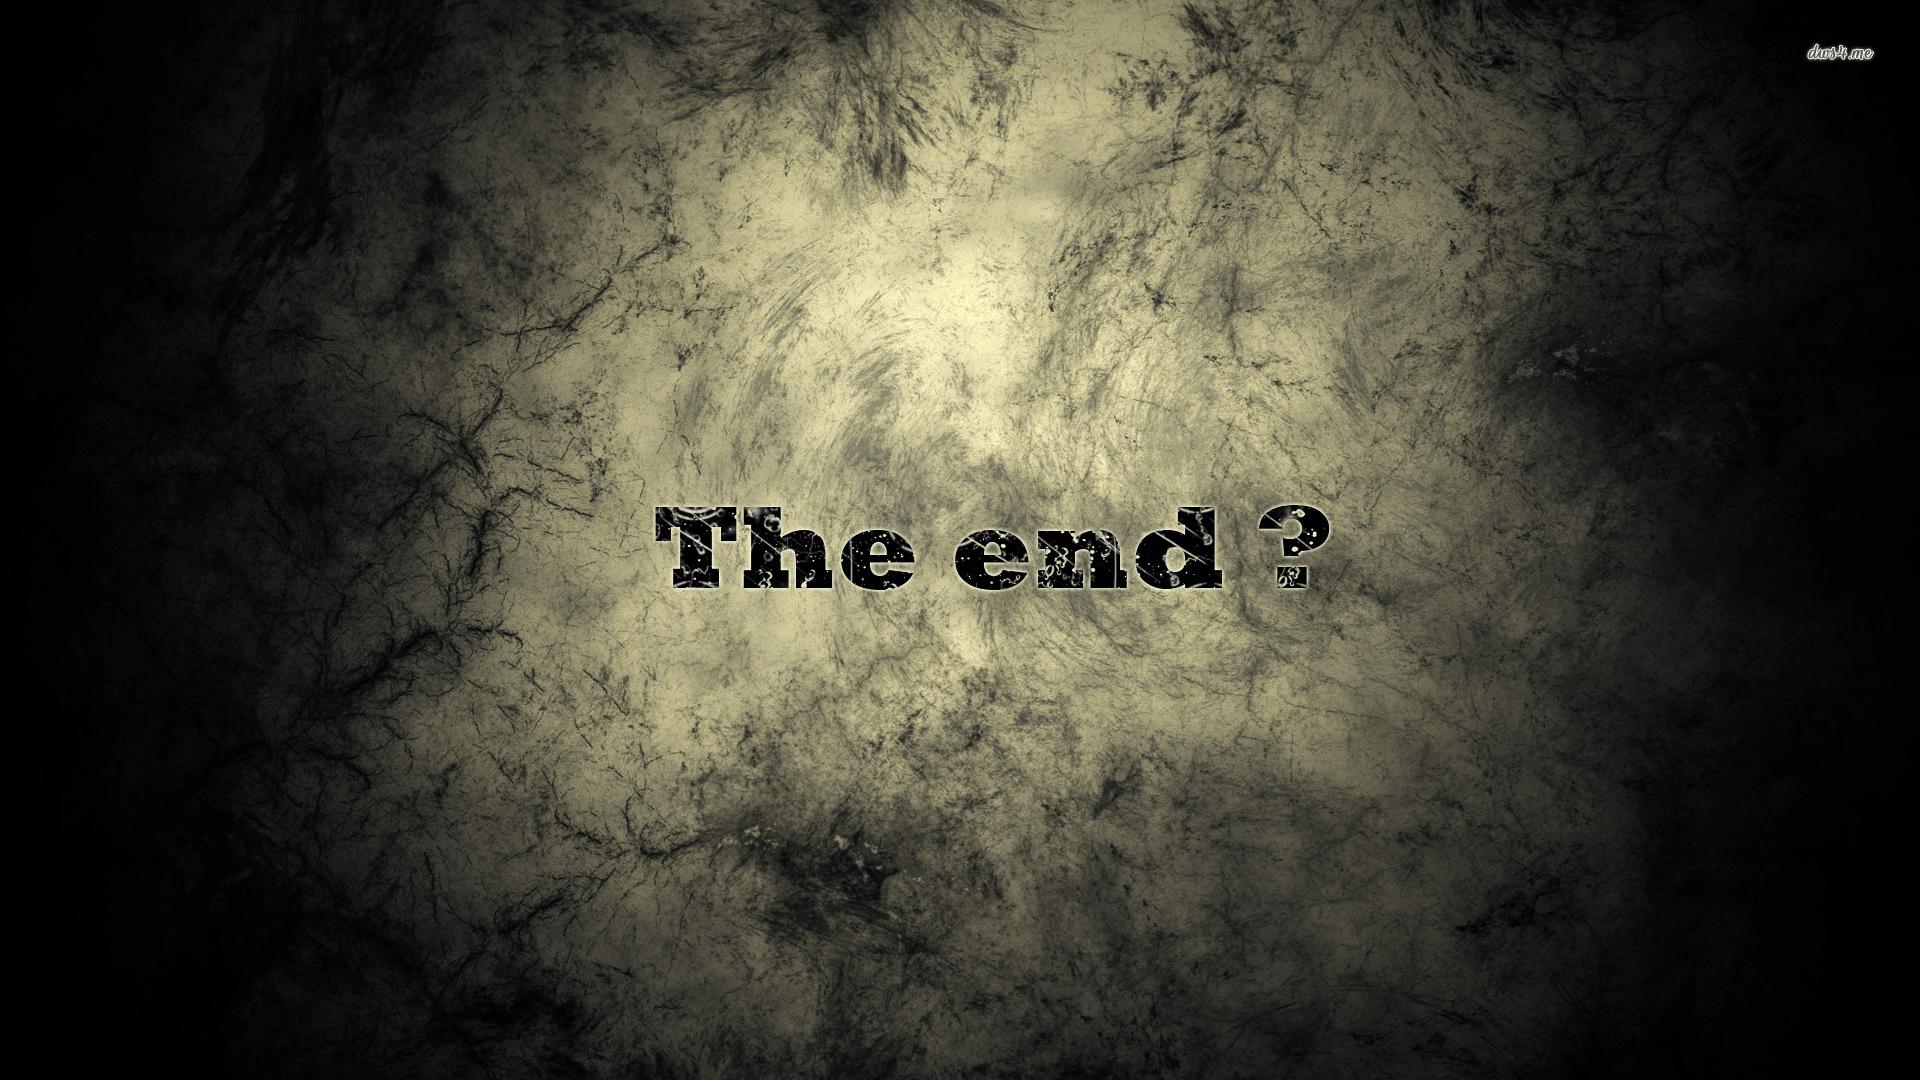 Is this the end wallpaper wallpaper